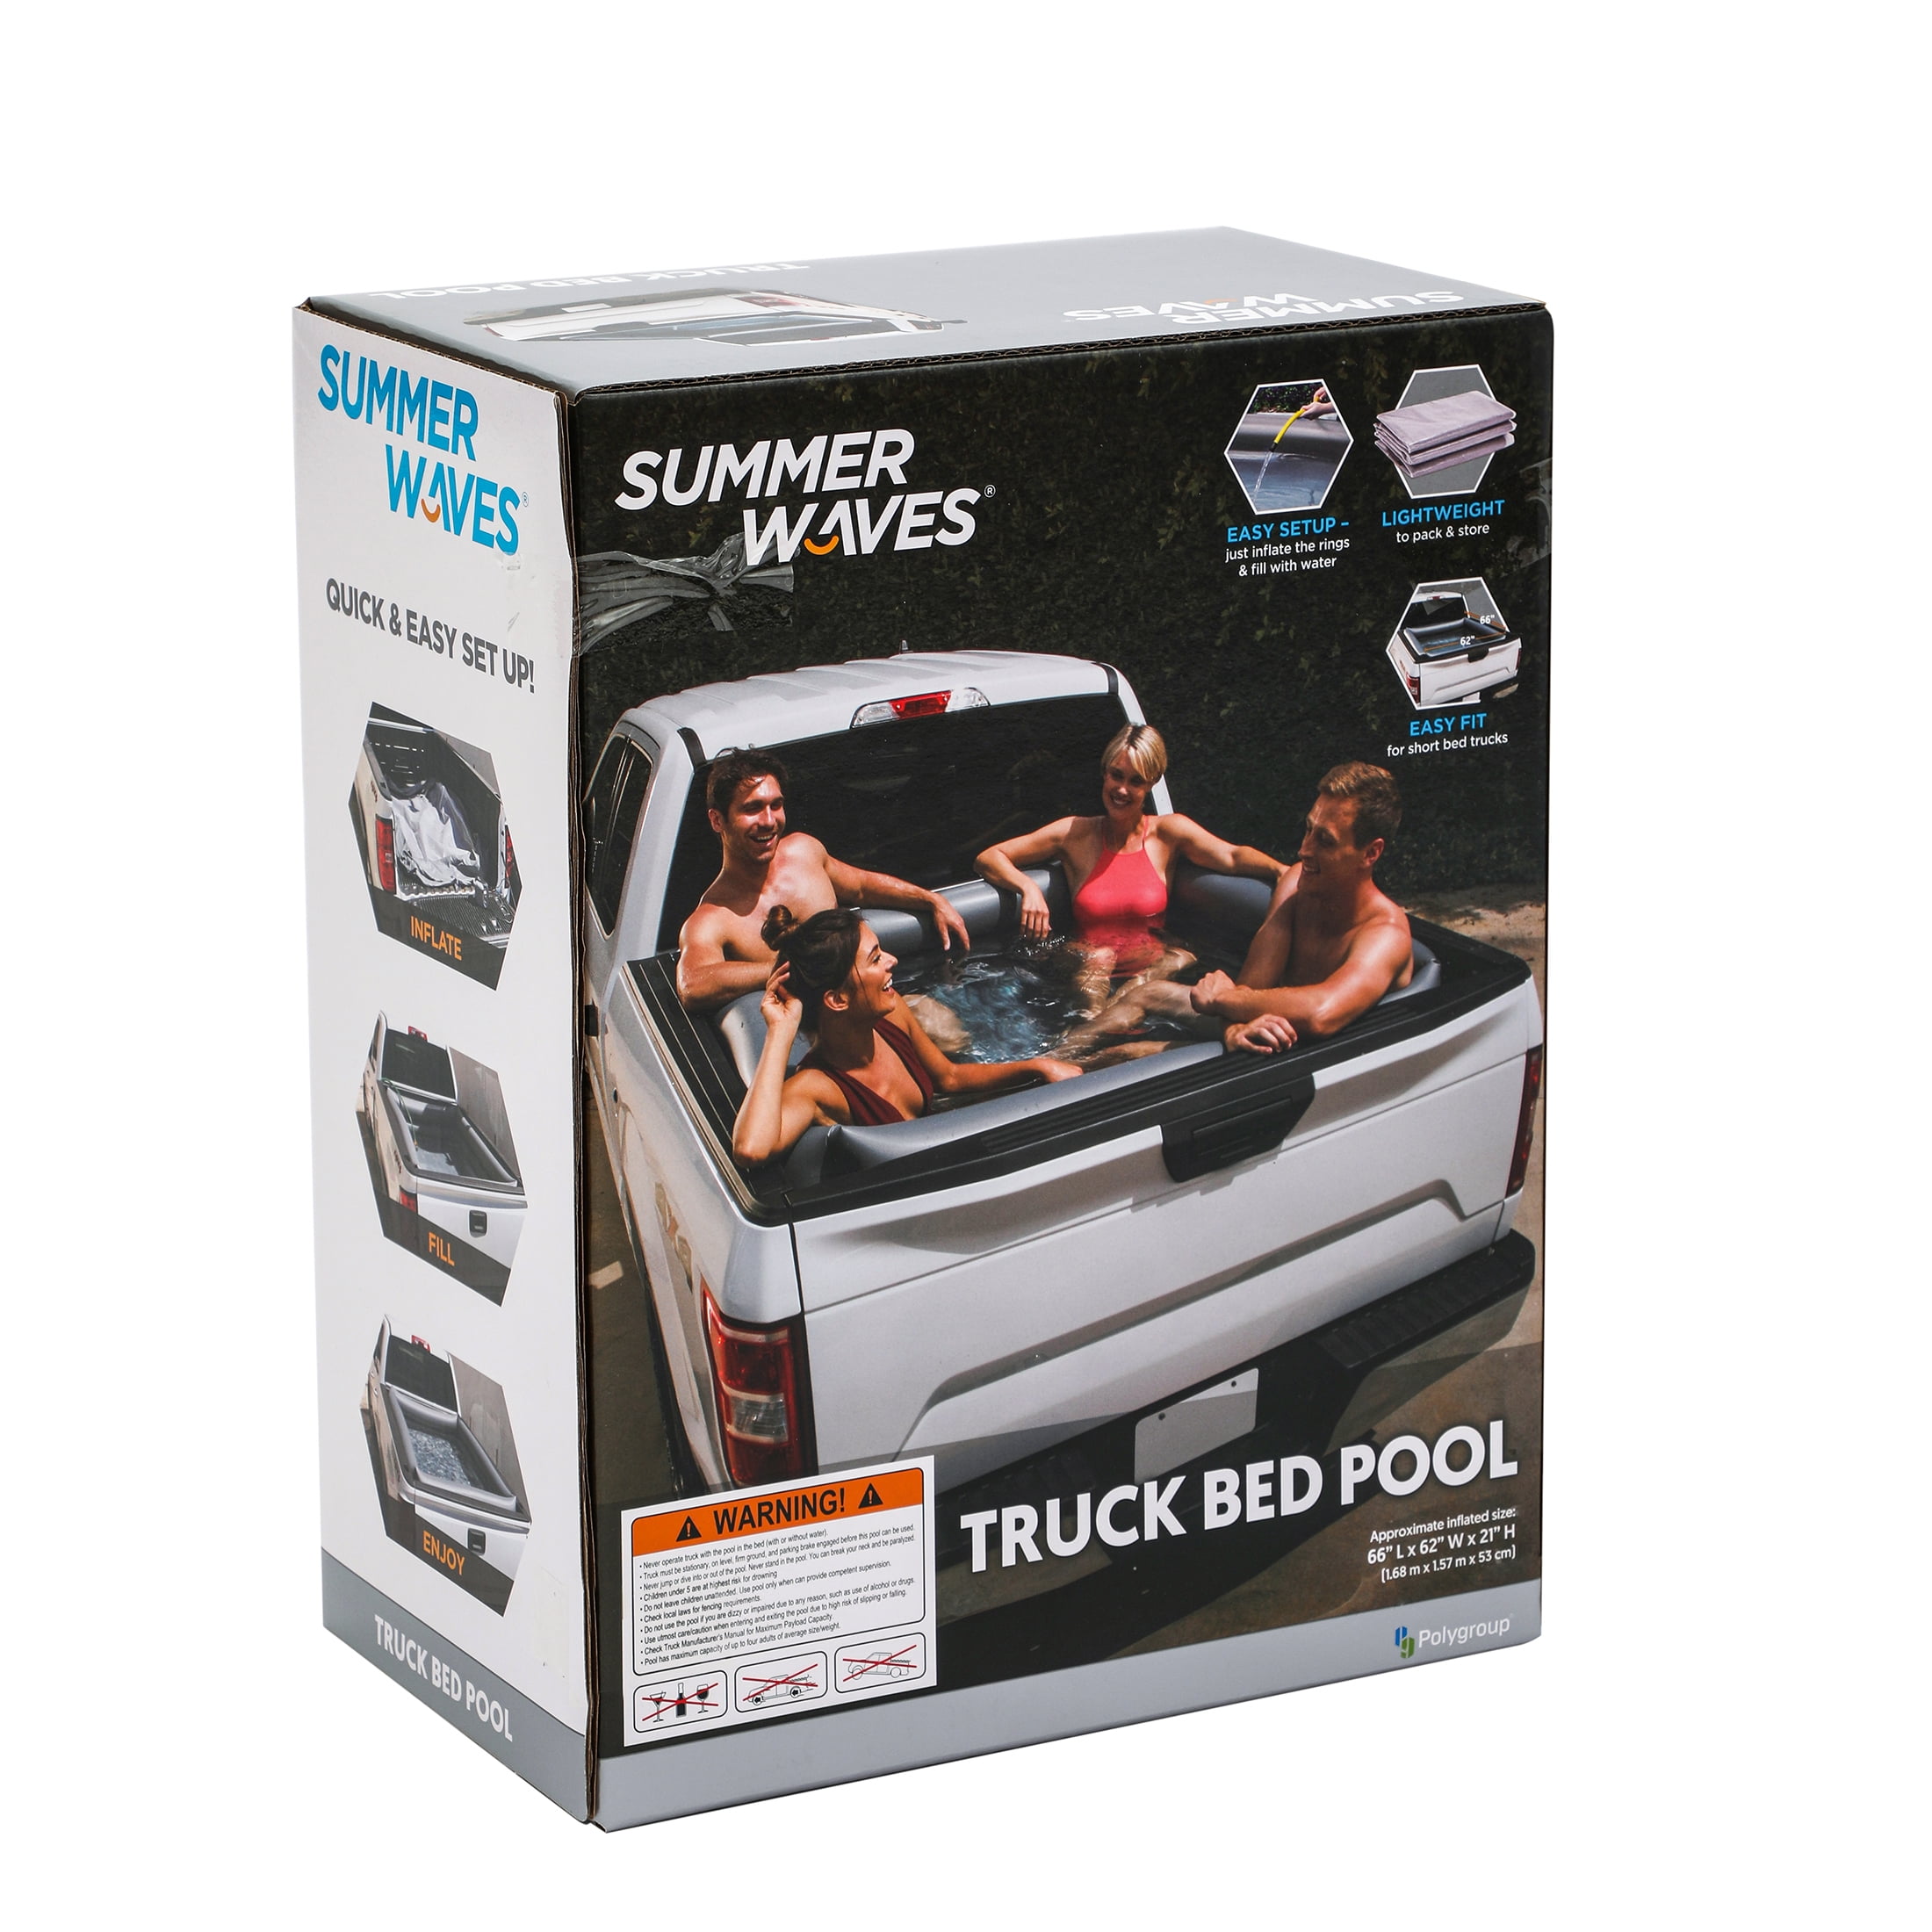 Summer Waves Inflatable Truck Bed Pool Measures 66"x62"x21" 